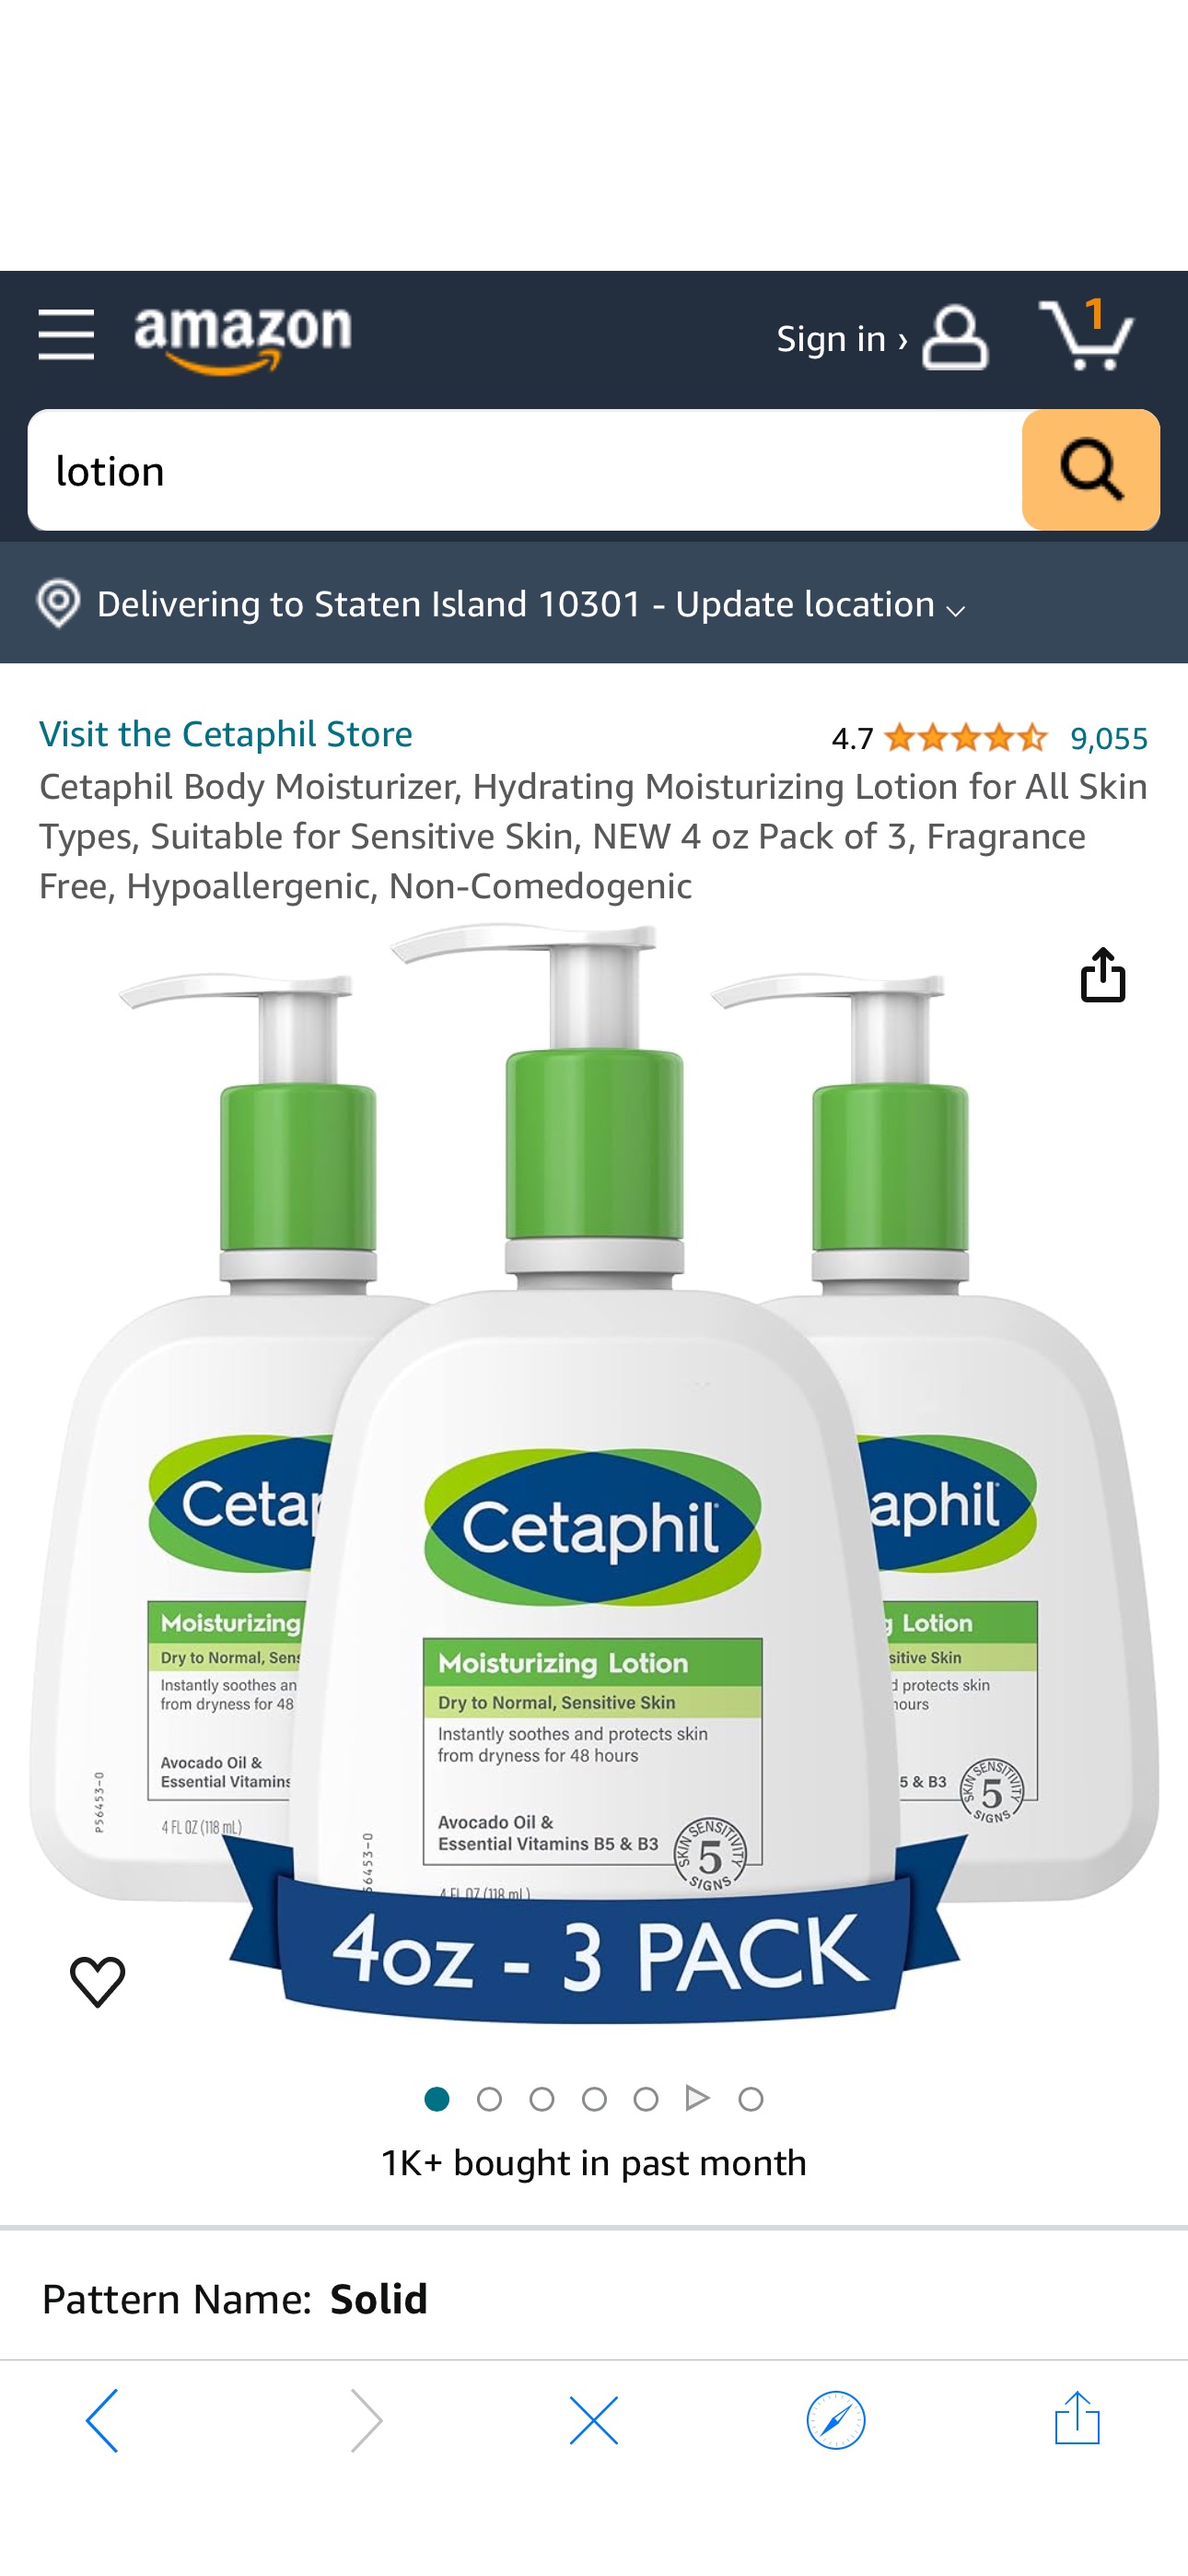 Amazon.com : Cetaphil Body Moisturizer, Hydrating Moisturizing Lotion for All Skin Types, Suitable for Sensitive Skin, NEW 4 oz Pack of 3, Fragrance Free, Hypoallergenic, Non-Comedogenic : Beauty & Pe